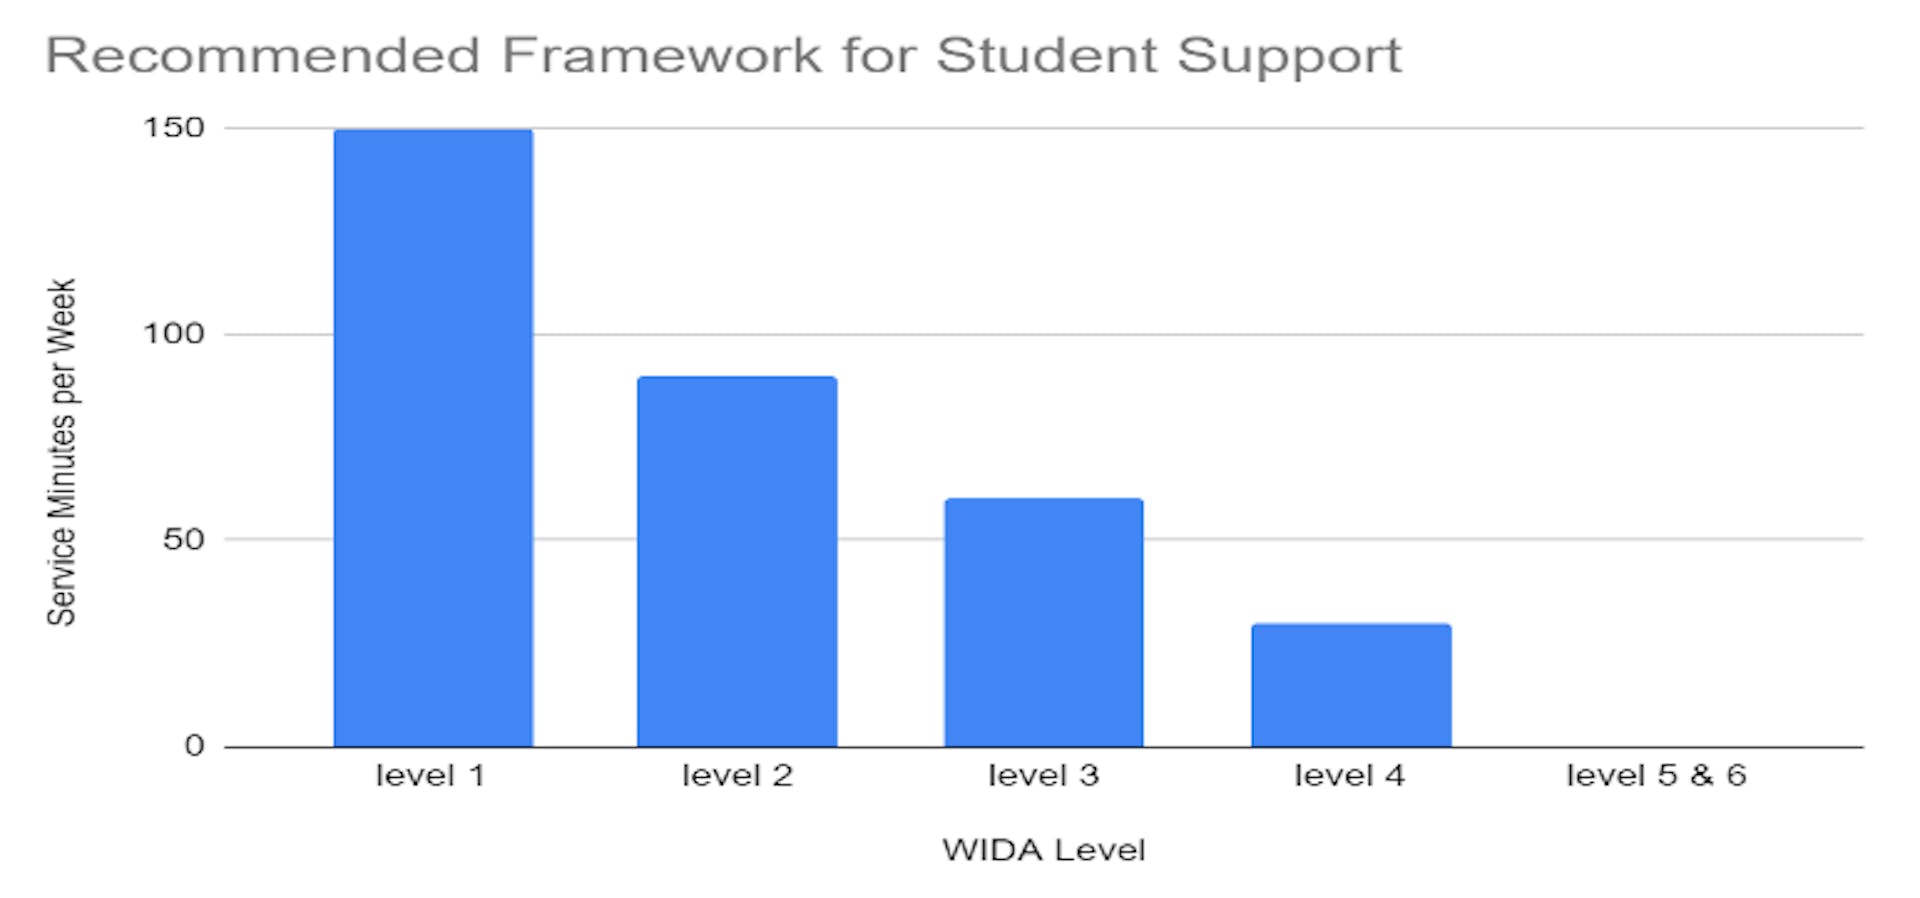  Recommended Framework for Student Support Graph 